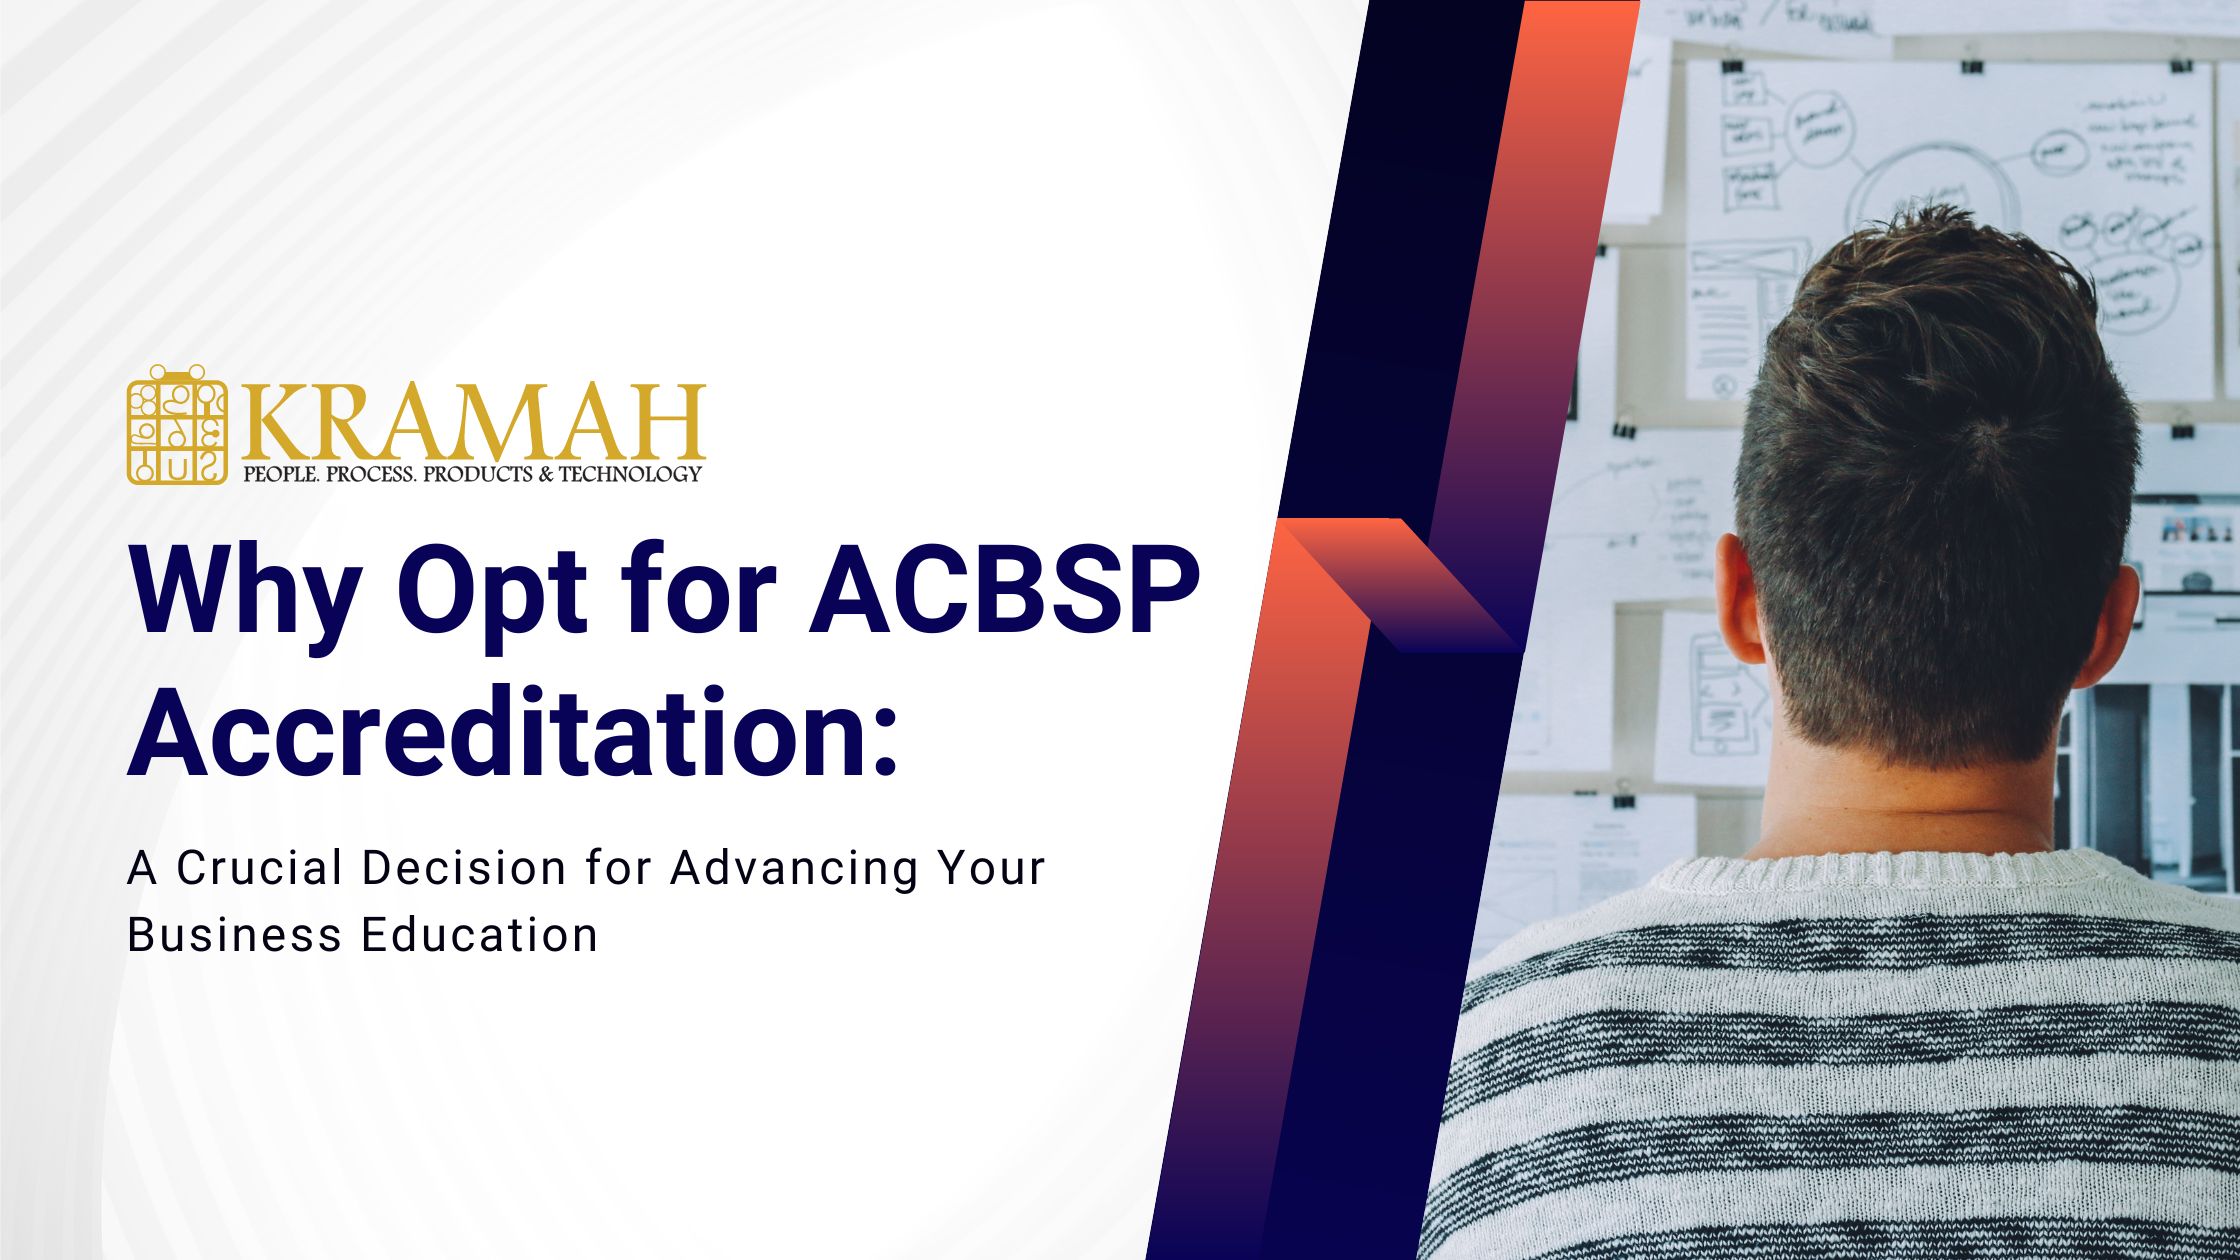 Why Opt for ACBSP Accreditation